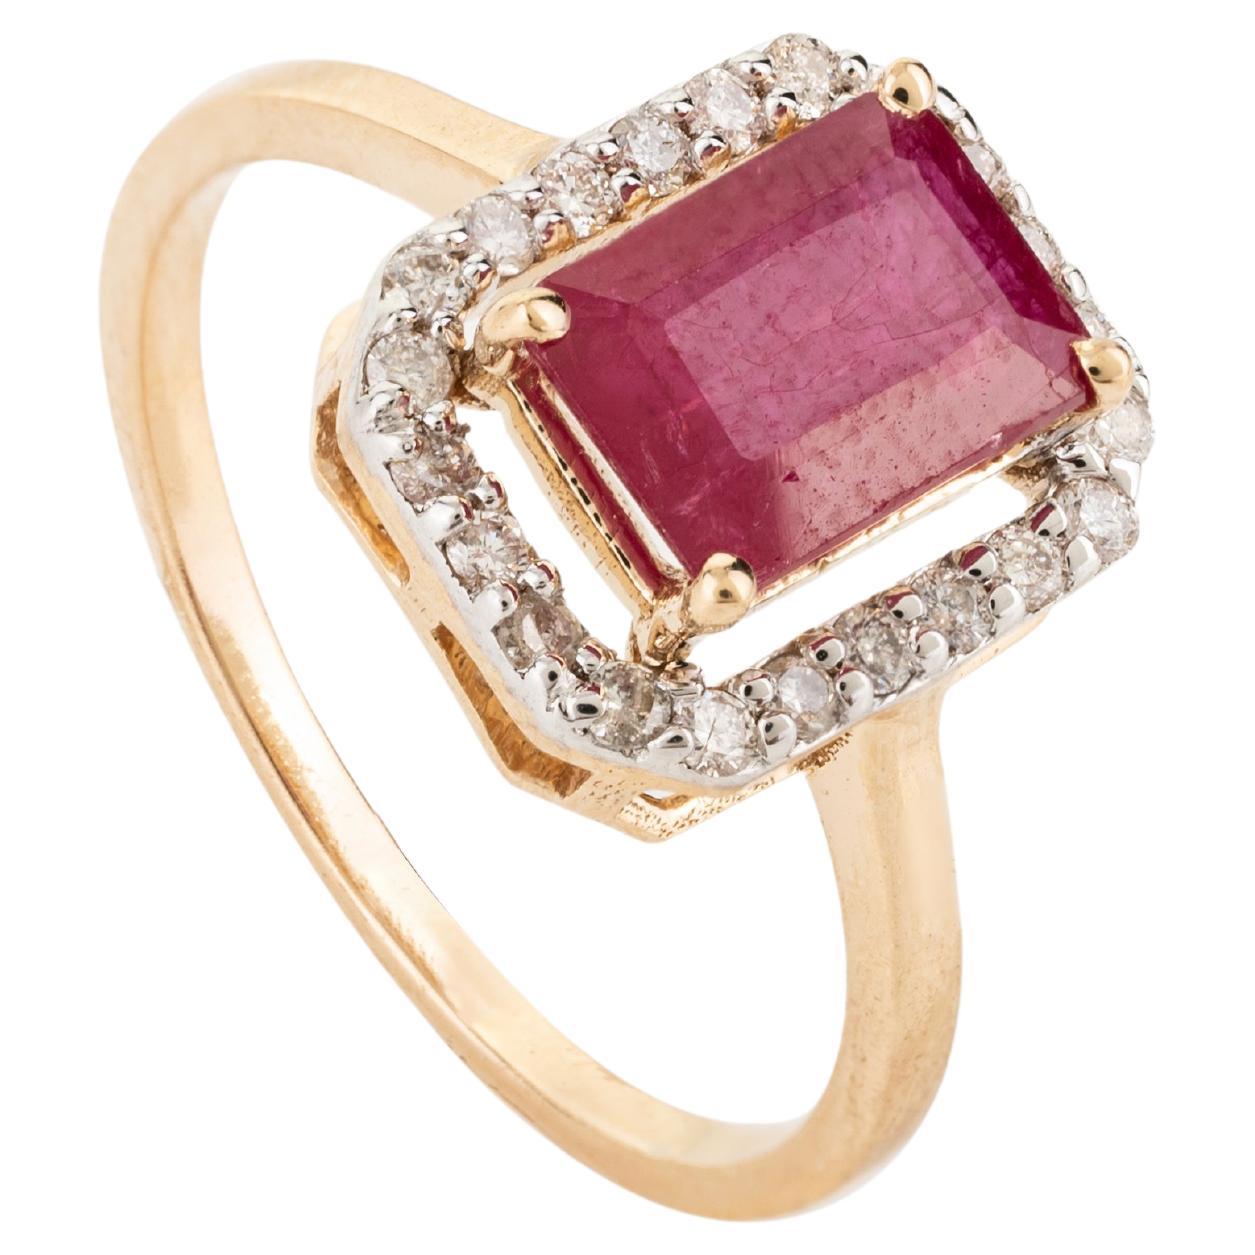 For Sale:  Deep Red Ruby Halo Diamond Engagement Ring in Solid 18 Karat Yellow Gold